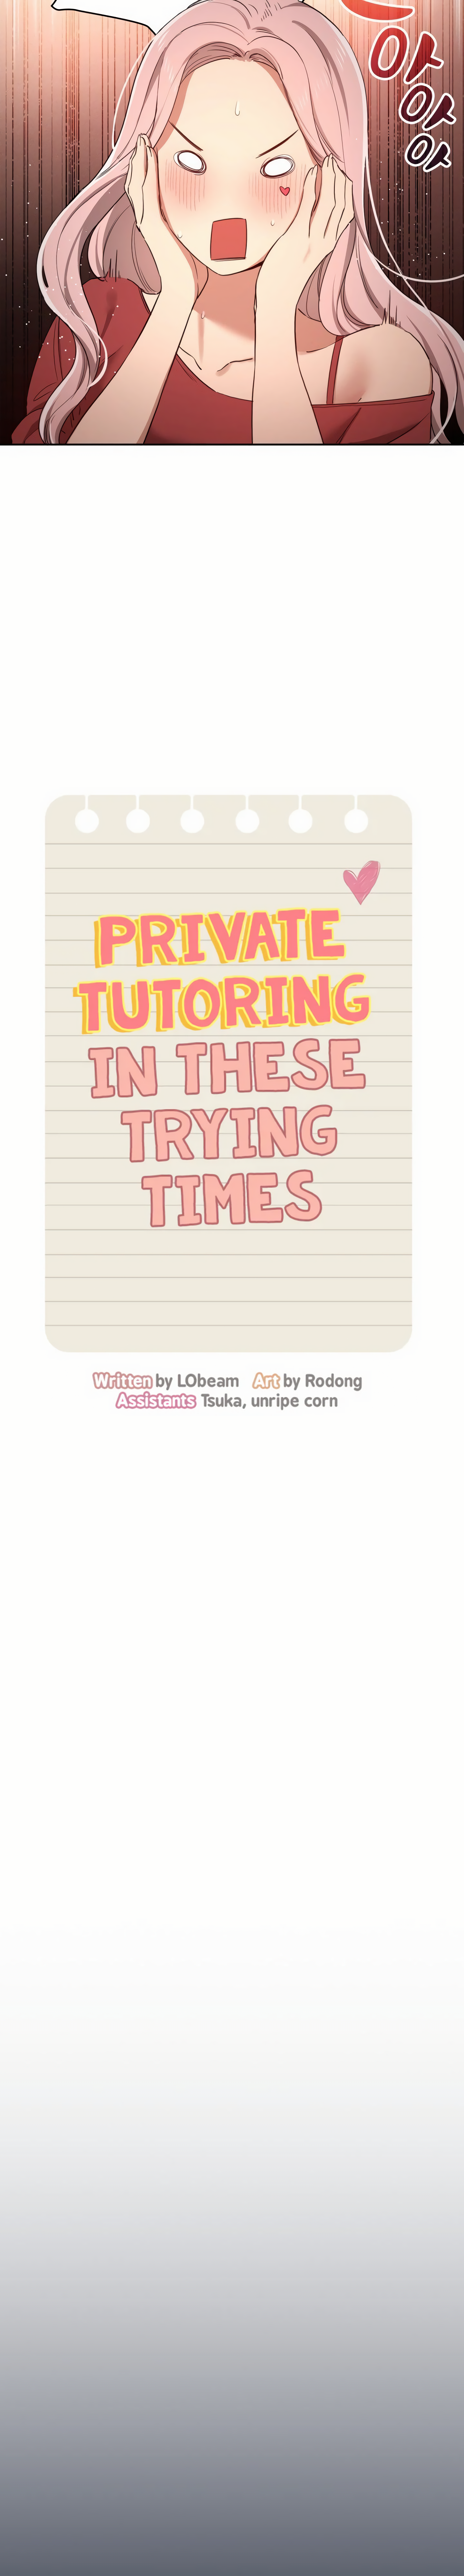 private-tutoring-in-these-difficult-times-chap-33-3